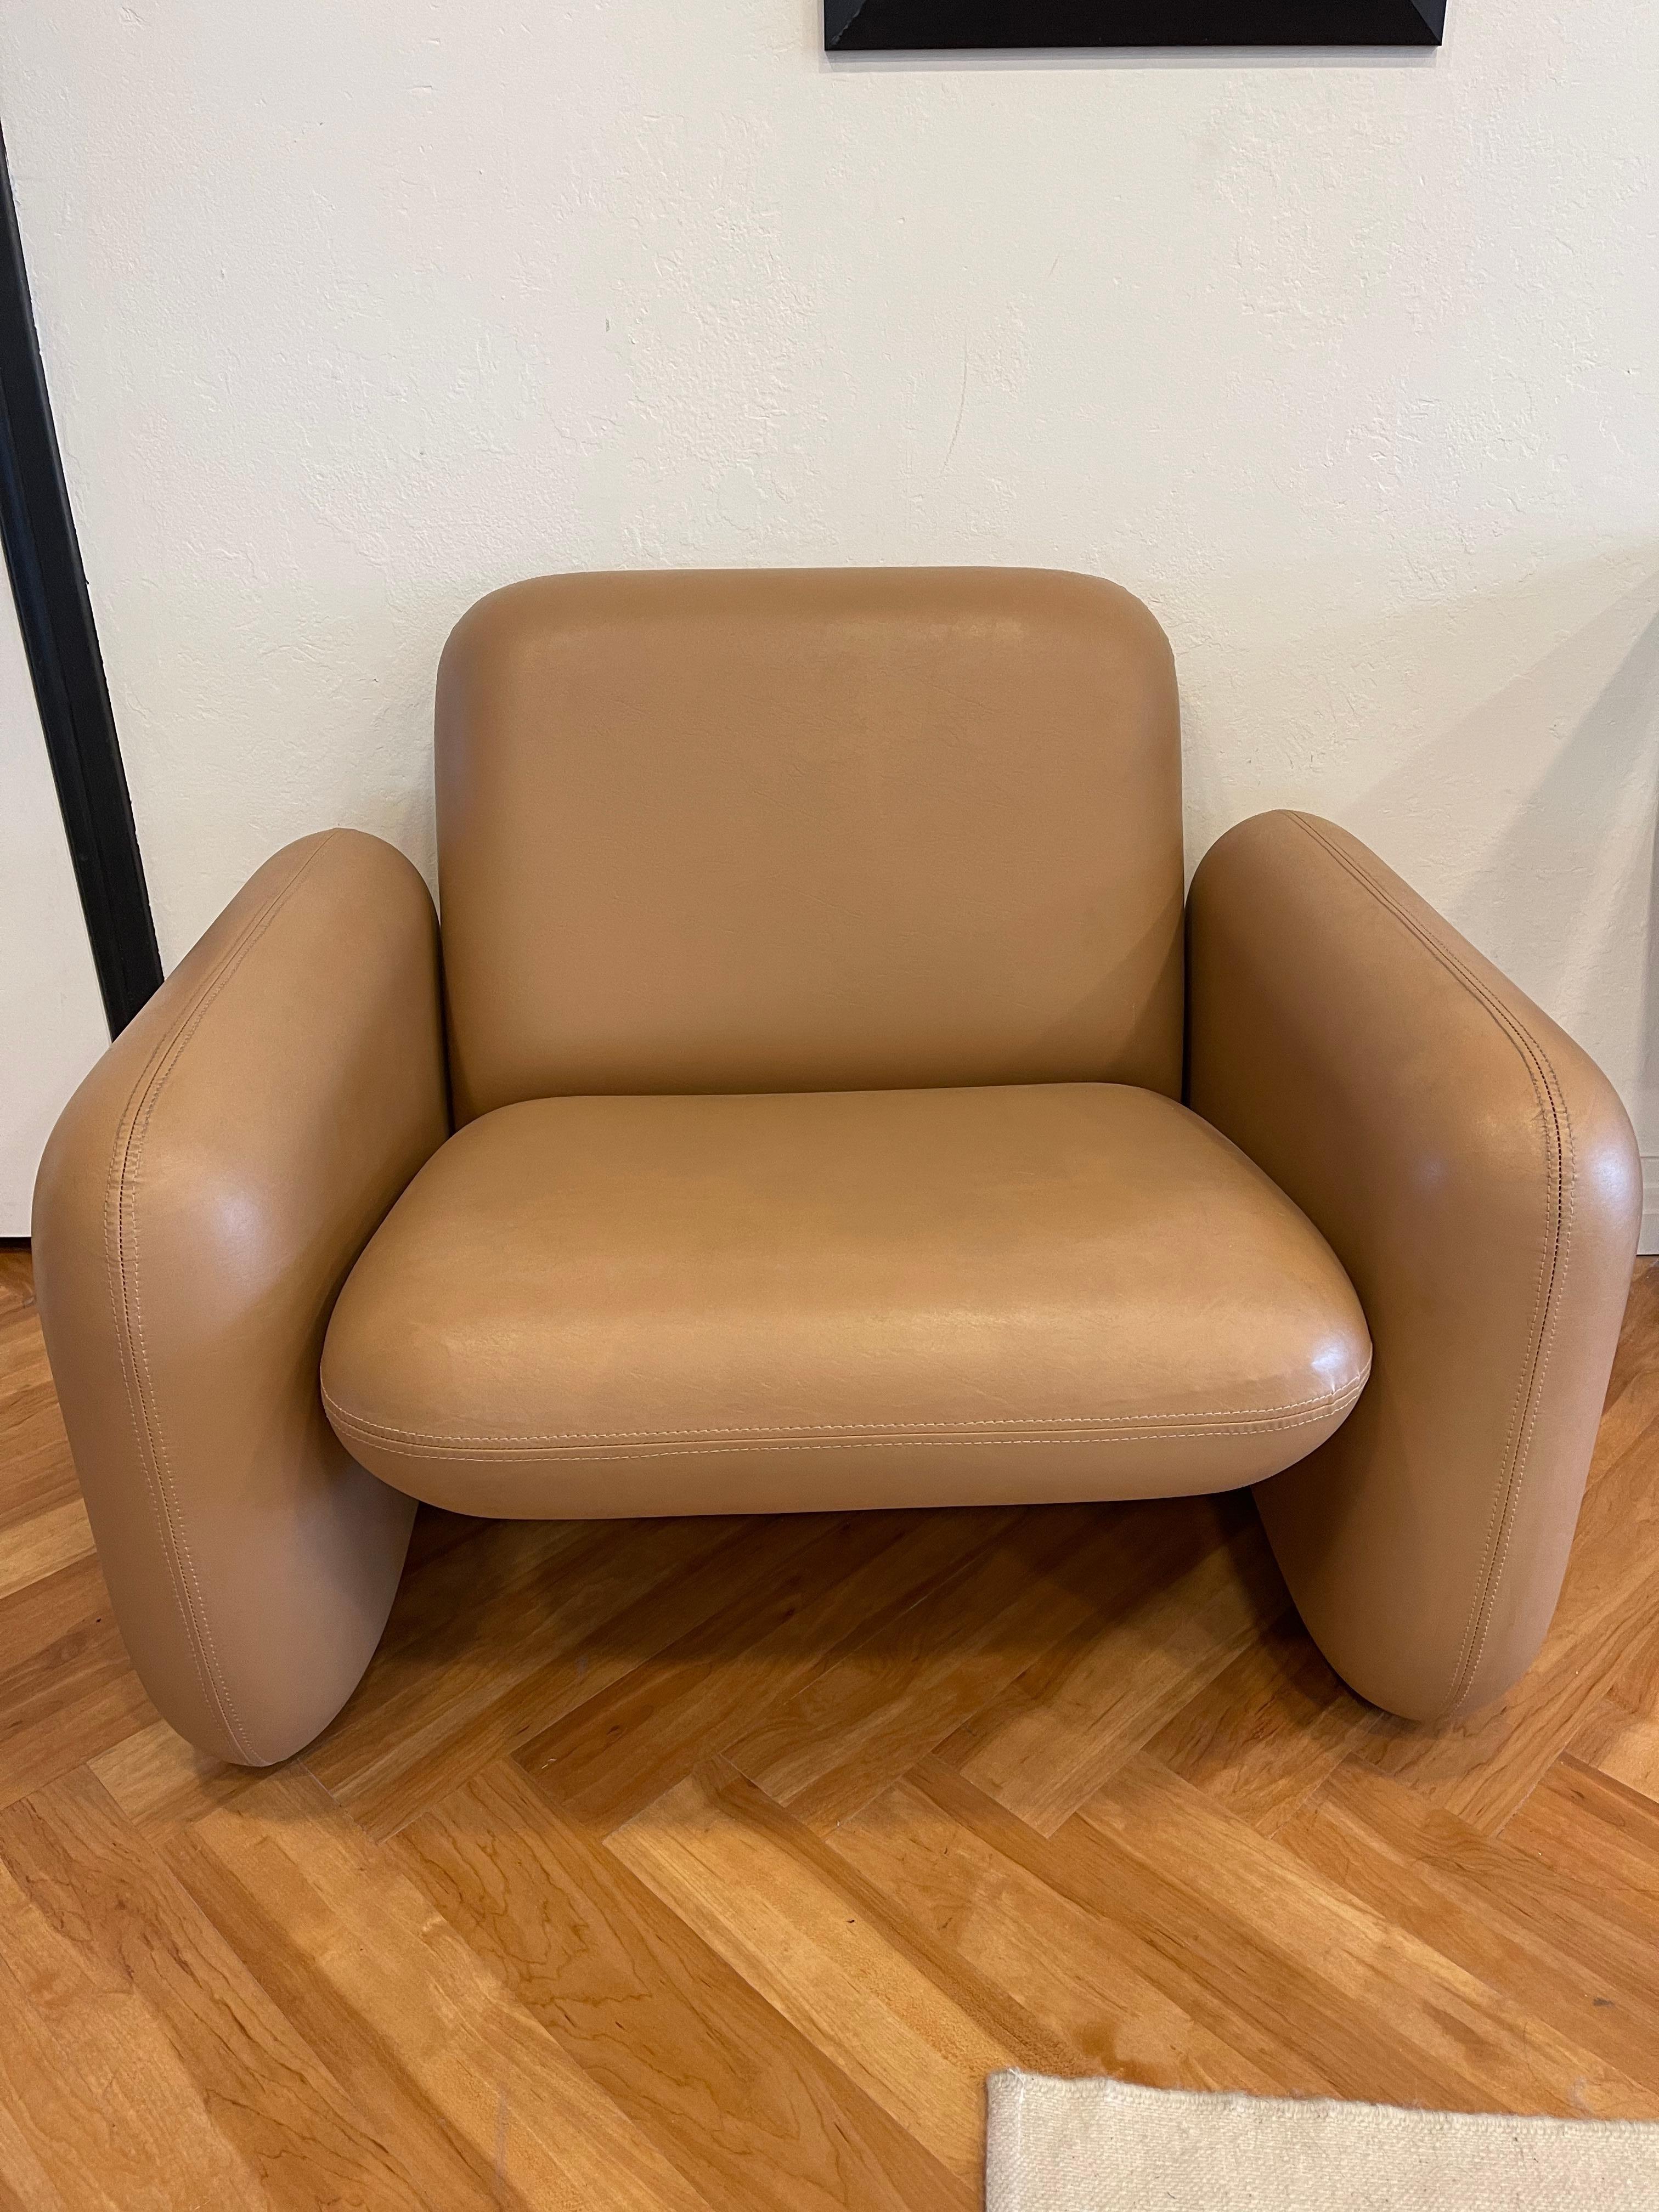 Vintage Ray Wilkes modular seating group (aka chiclet) chair. Upholstered in custom beige leather.